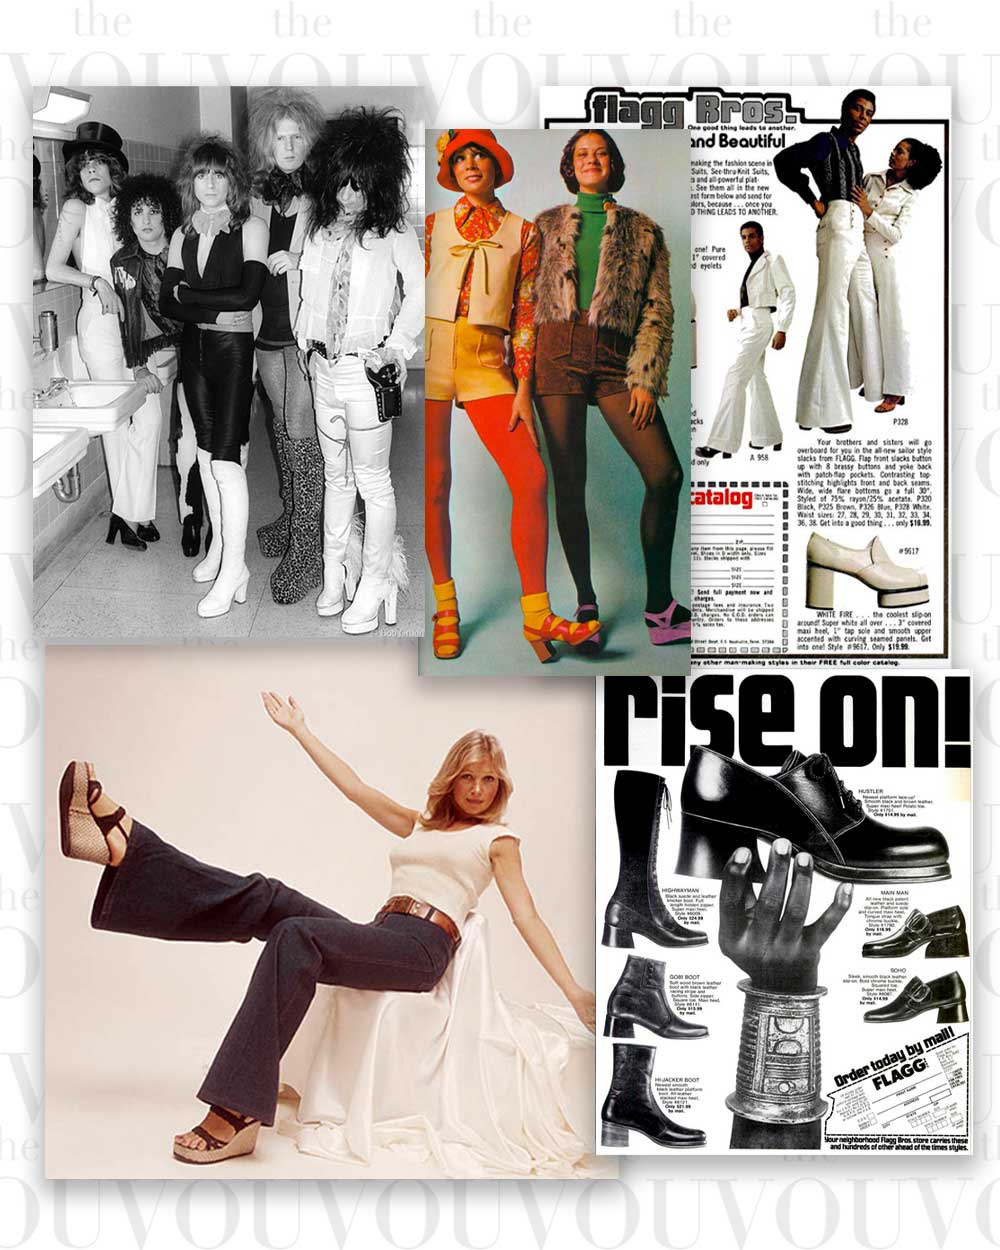 70s Wedges & Platform Shoes in the 1970s fashion